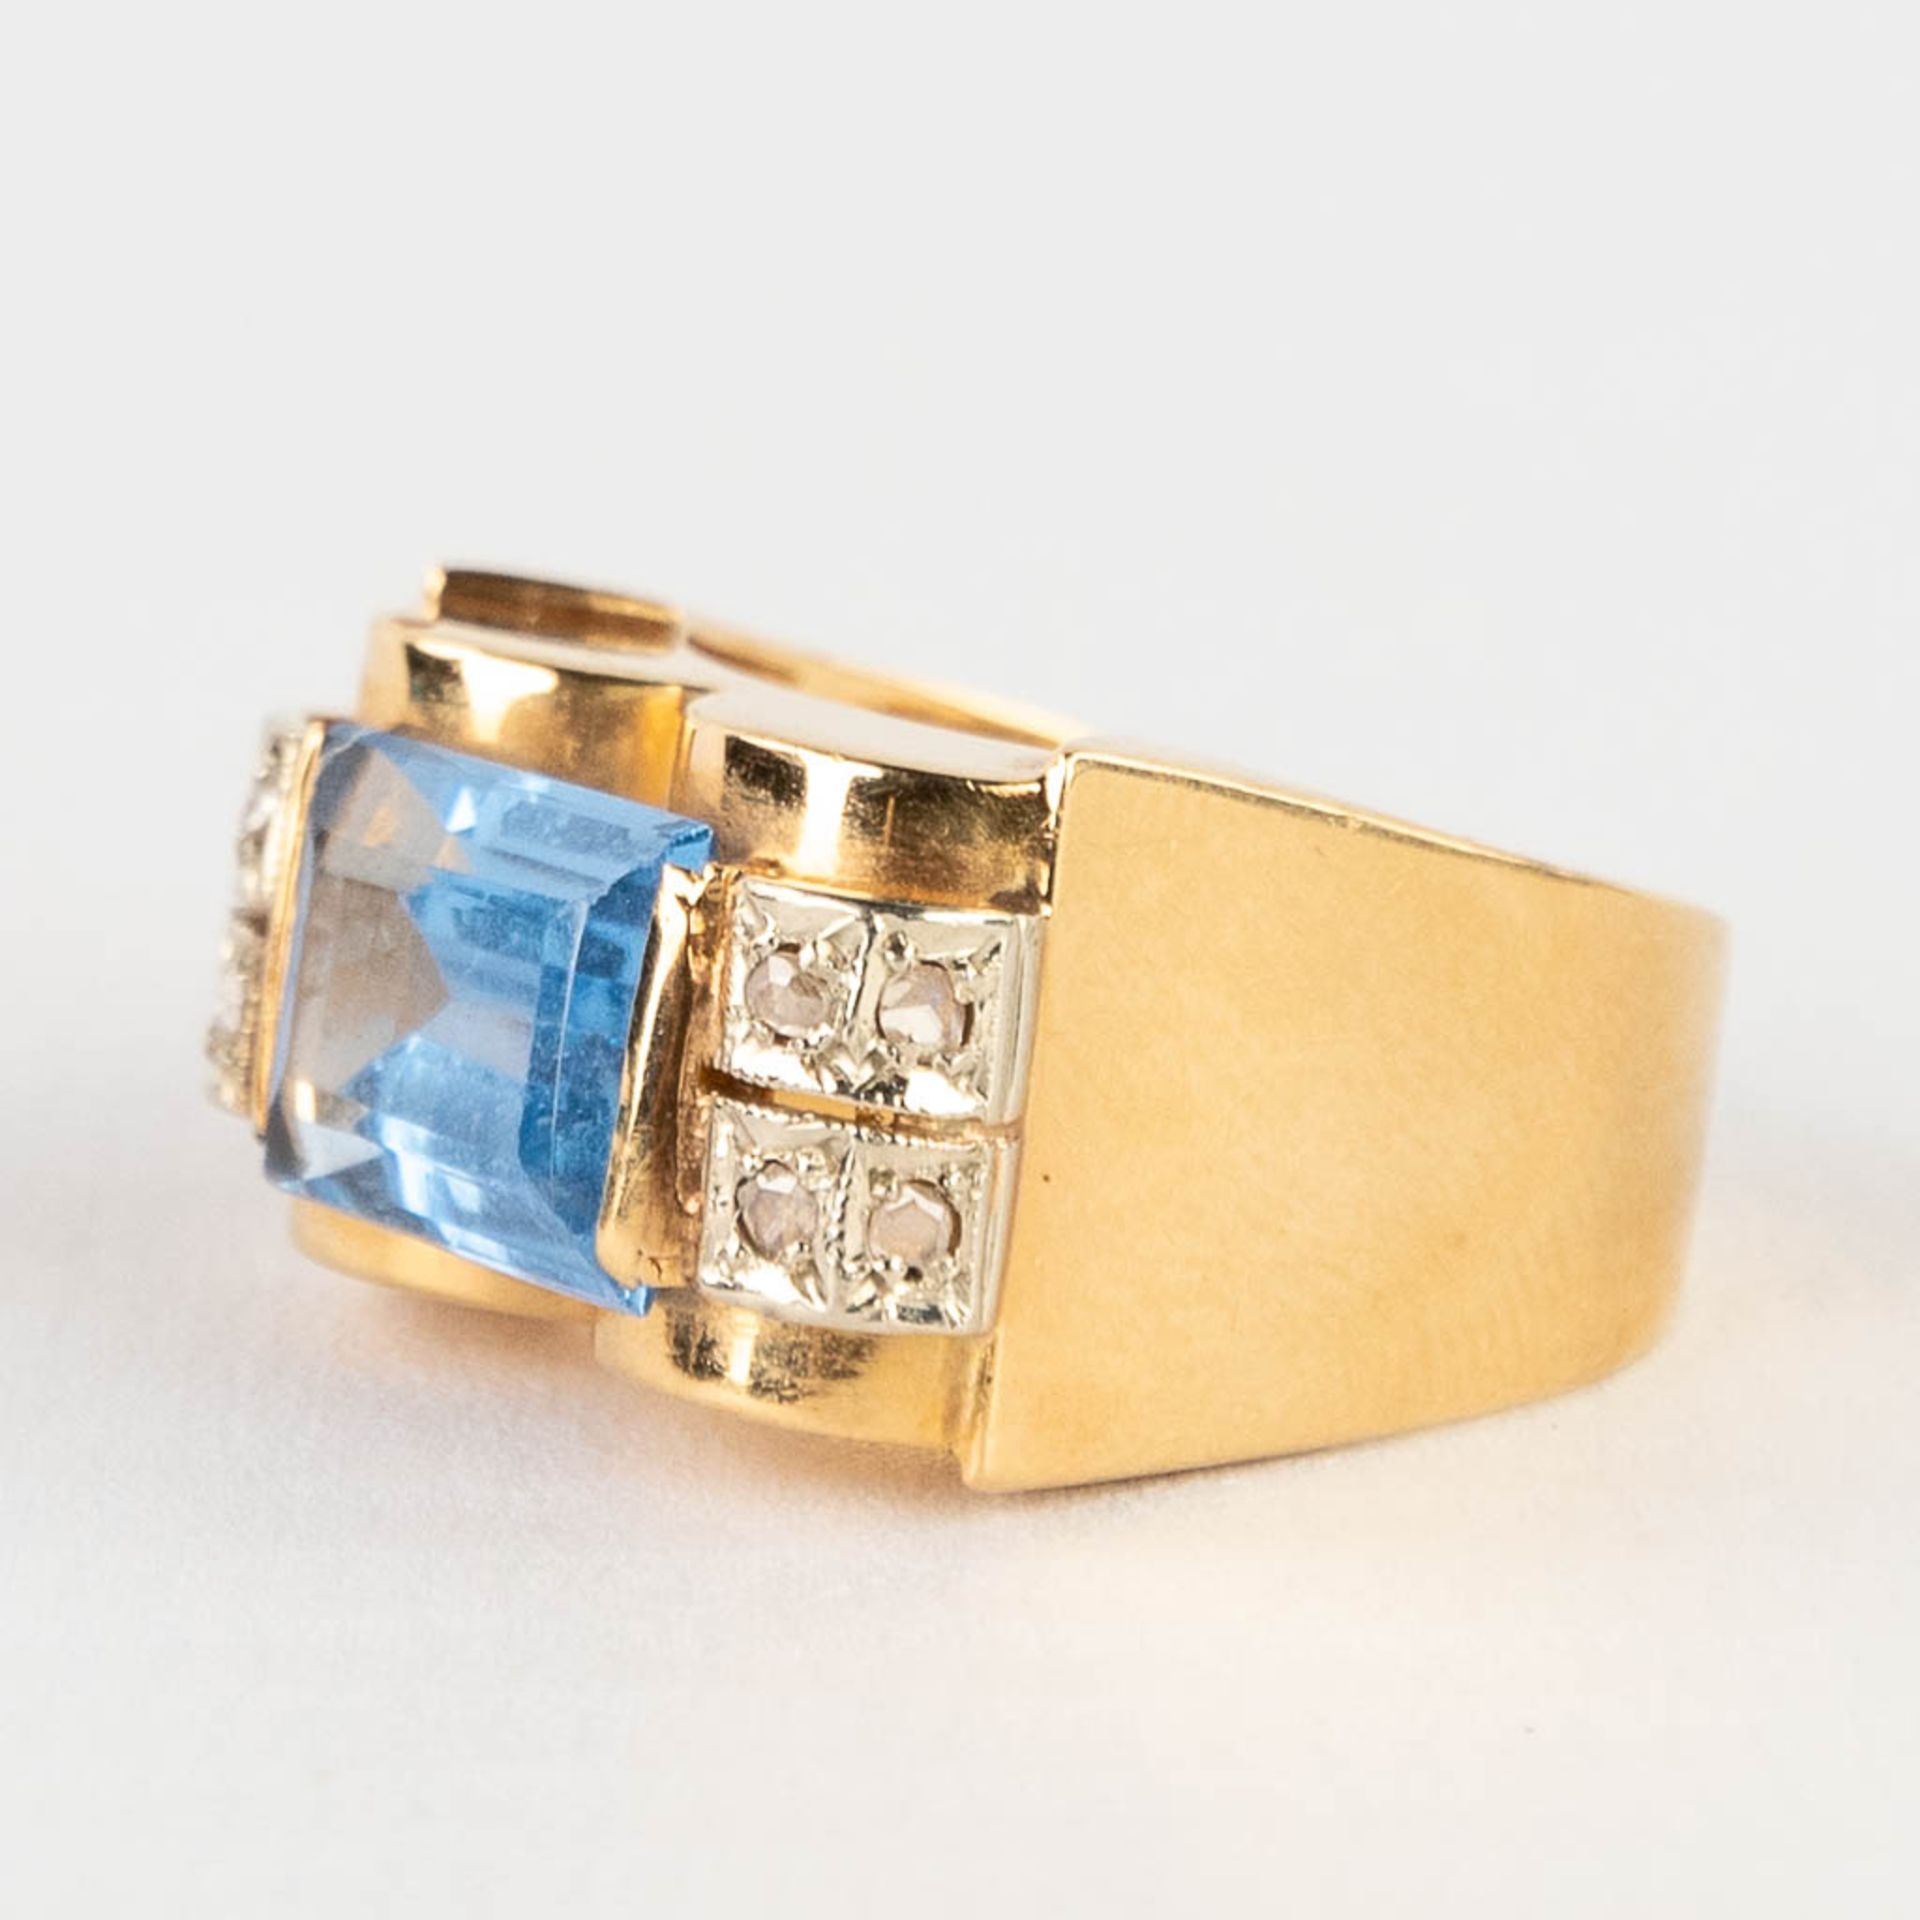 A ring, yellow gold with light blue cut stone/glass. 8,29g. Ring size: 58. 18 karat gold. - Image 4 of 10